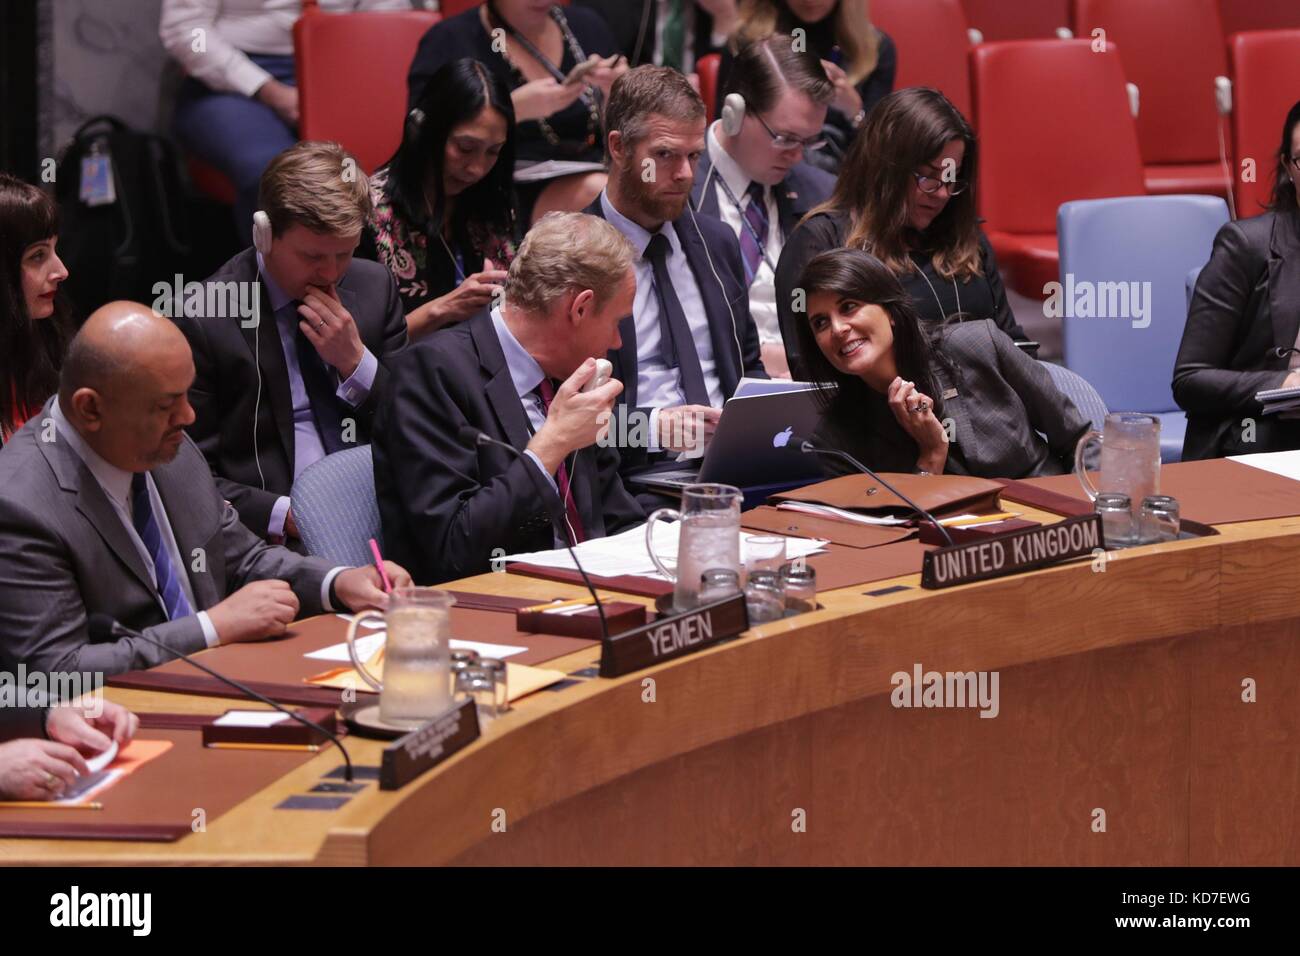 United Nations, New York, USA, October 10 2017 - British UN Ambassador Matthew Rycroft and Nikki R. Haley, United States Permanent Representative to the UN During a Security Council meeting on Yemen today at the UN Headquarters in New York. Photo: Luiz Rampelotto/EuropaNewswire | usage worldwide Stock Photo